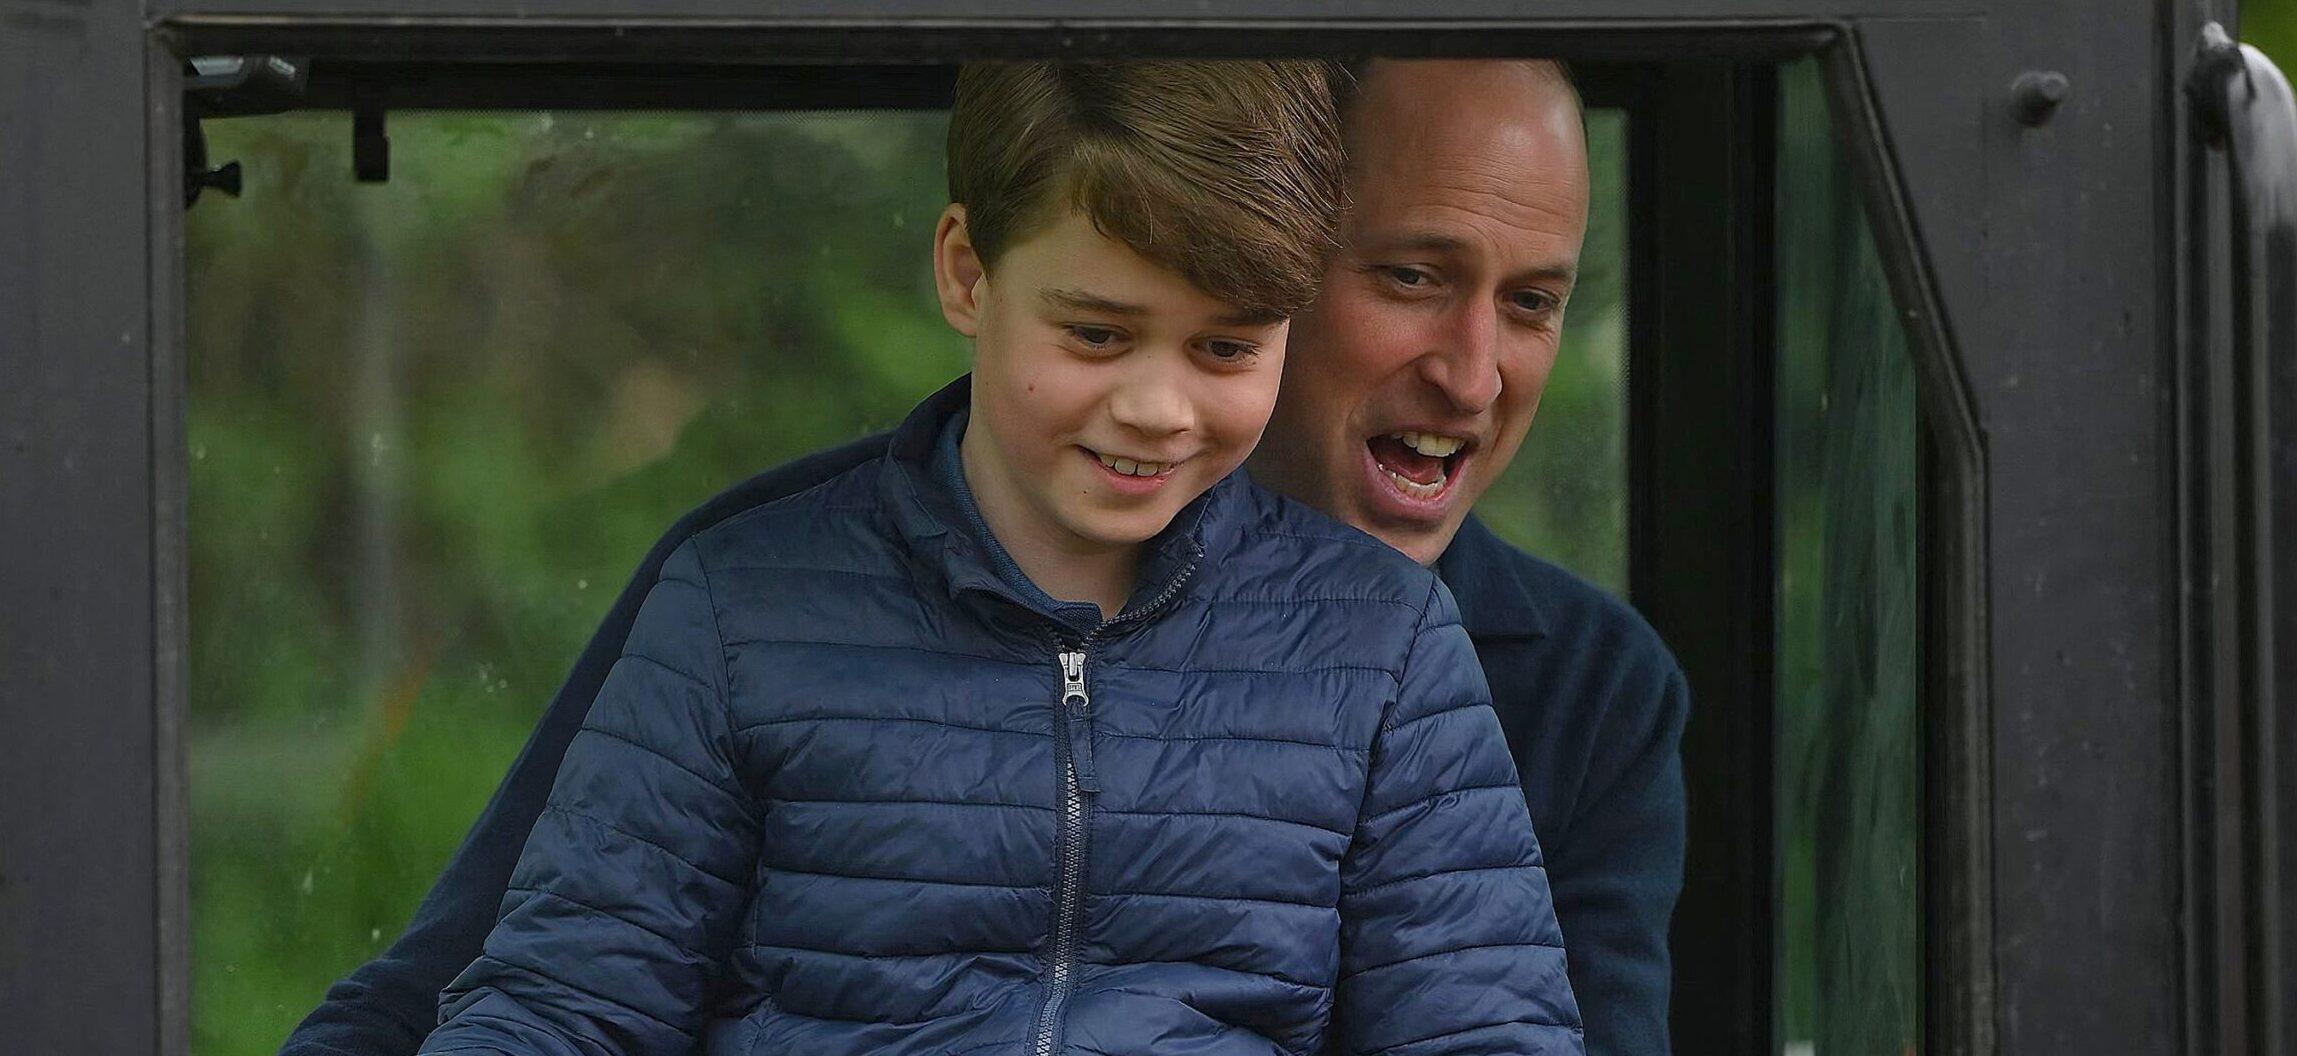 Prince William Bonds With Son Prince George Over Cricket Game